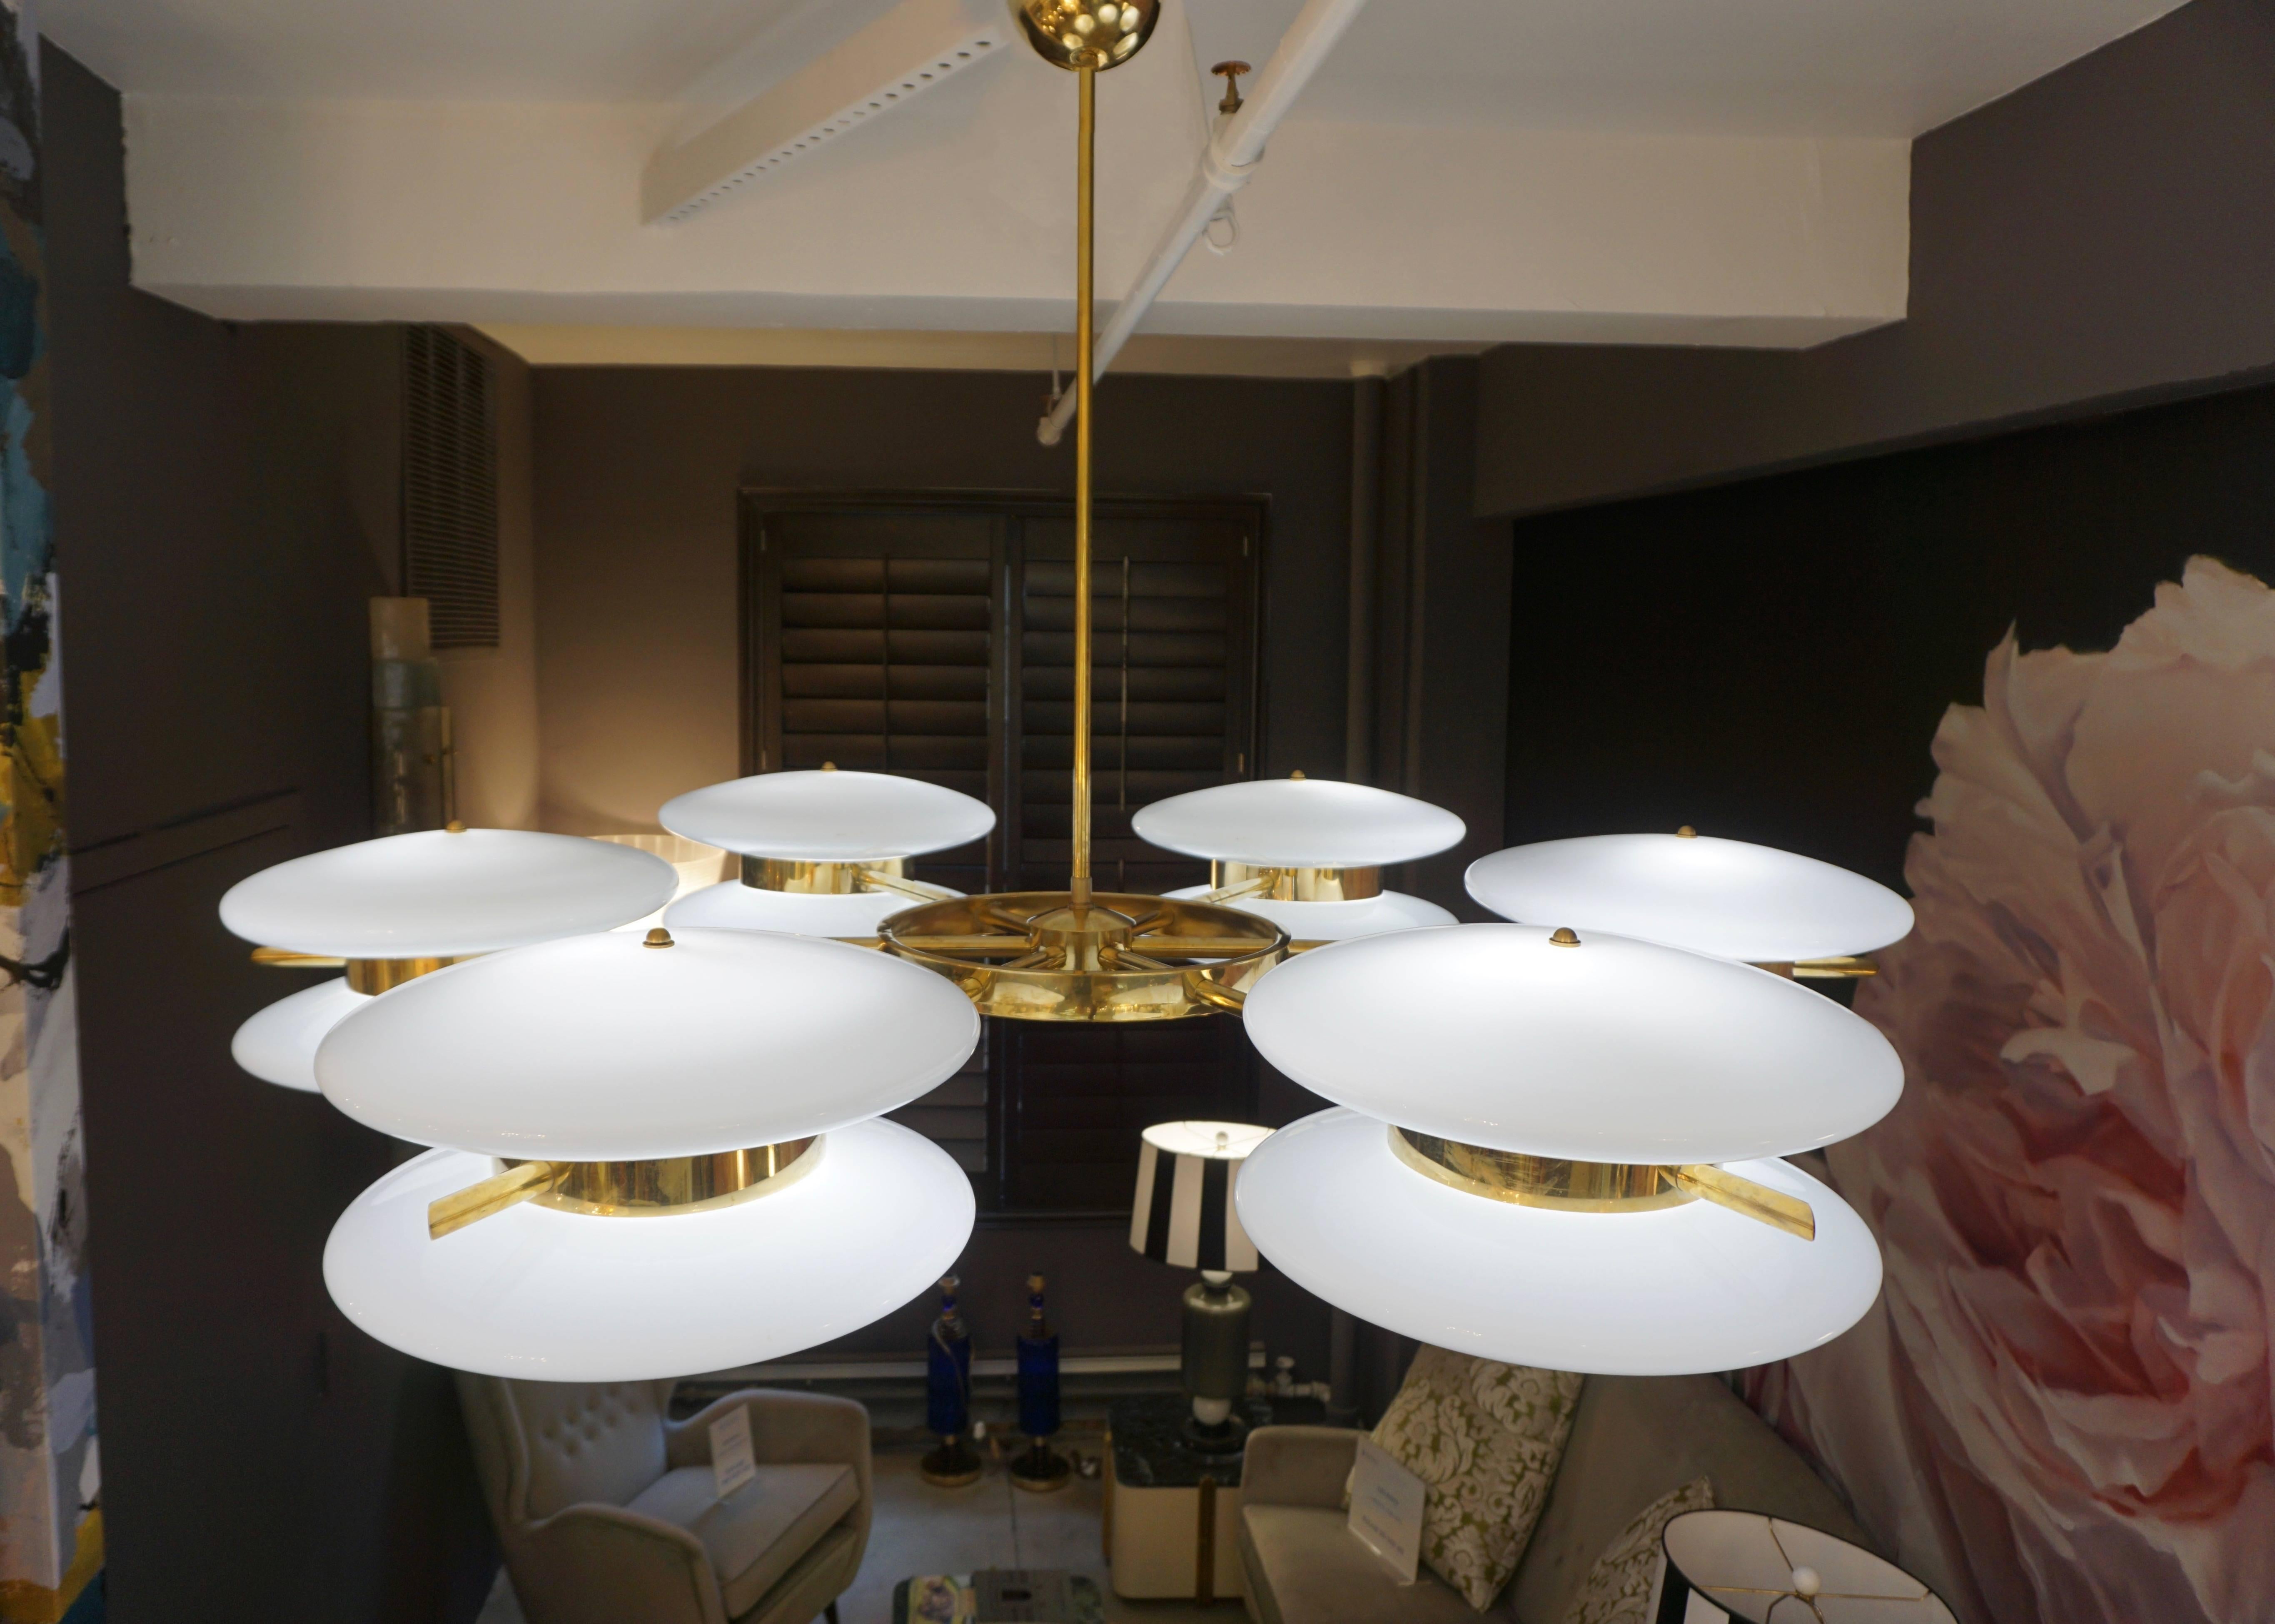 Italian fine organic wheel chandelier, entirely handcrafted in Italy with Exclusive Design, the airy modern round structure in brass with a central wheel element supports six surrounding white Murano glass double globes (15 in. Diameter) inset in a